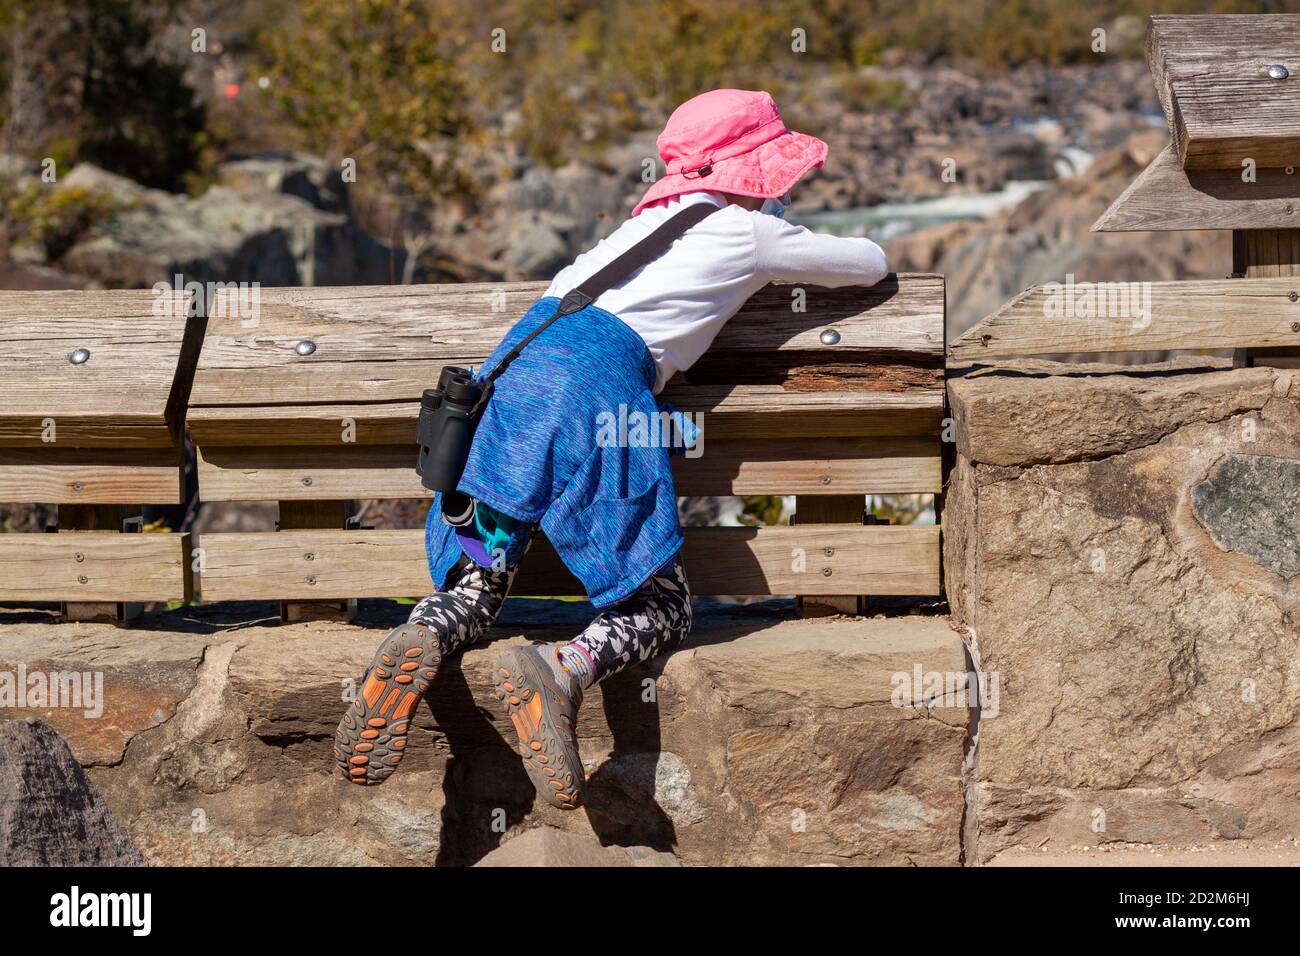 A curious little girl wearing pink solar hat and sneakers is climbing on the stone barriers to see the great falls of Virginia. This is a dangerous ac Stock Photo